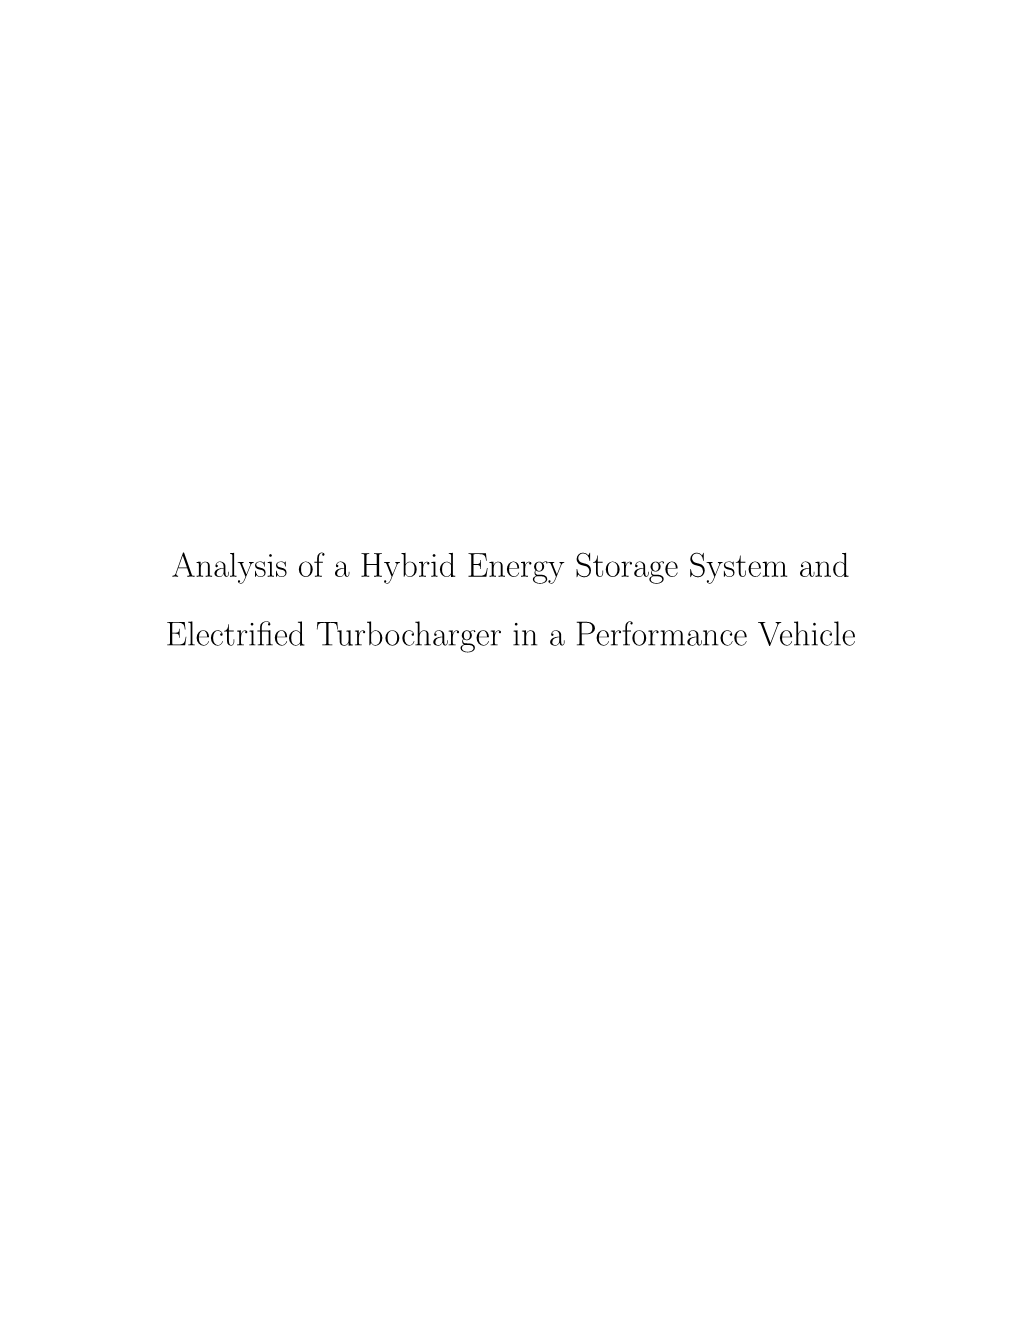 Analysis of a Hybrid Energy Storage System and Electrified